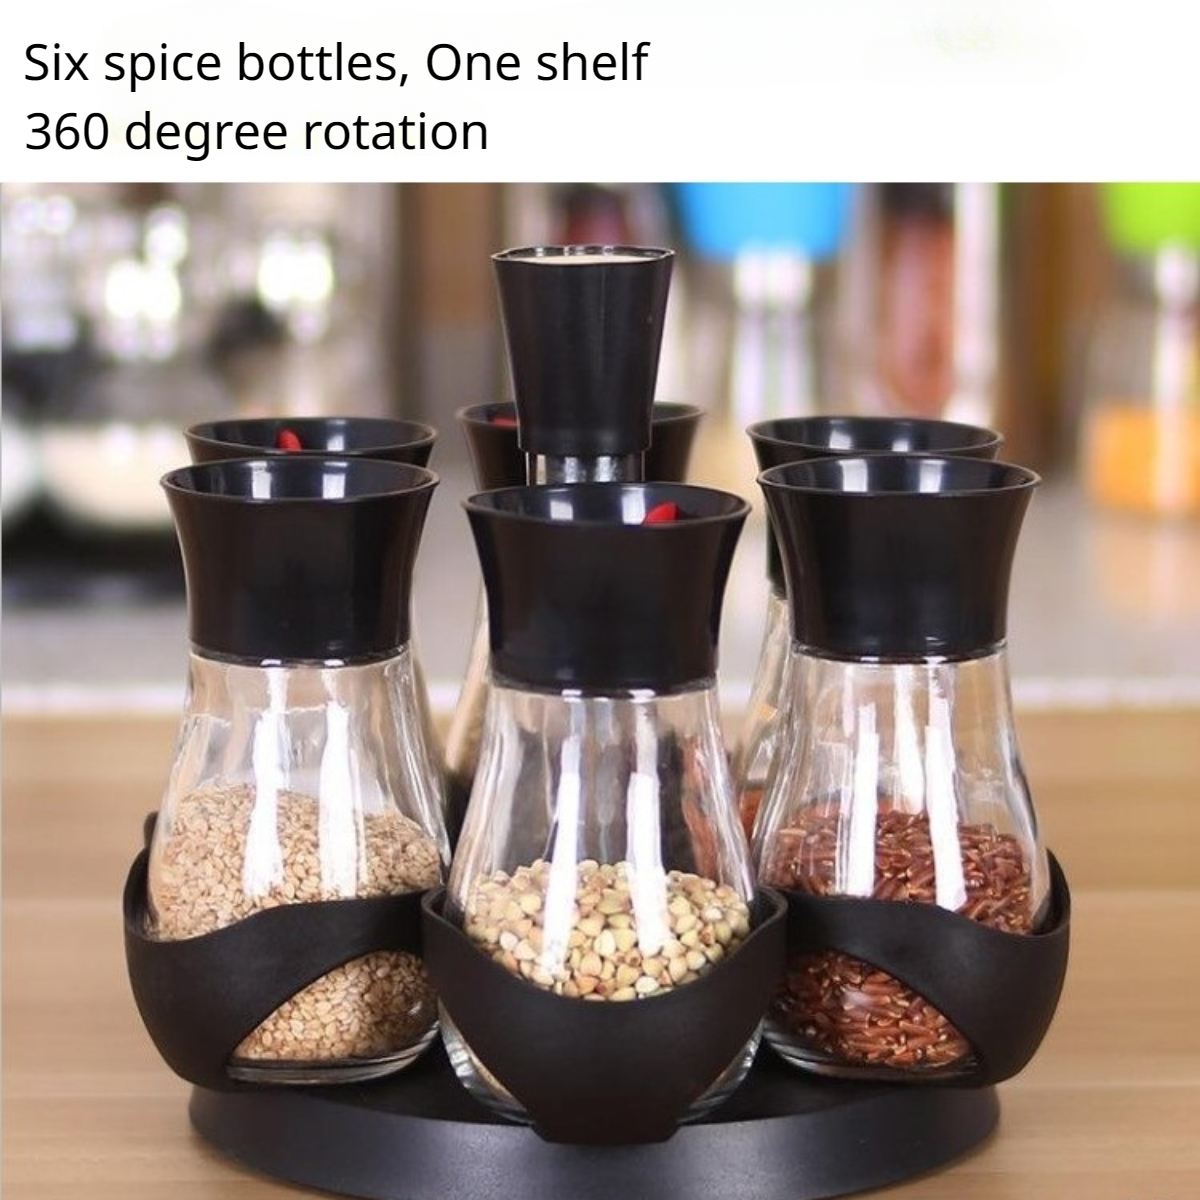 Orii 16 Jar Spice Rack with Spices Included - Rotating Countertop